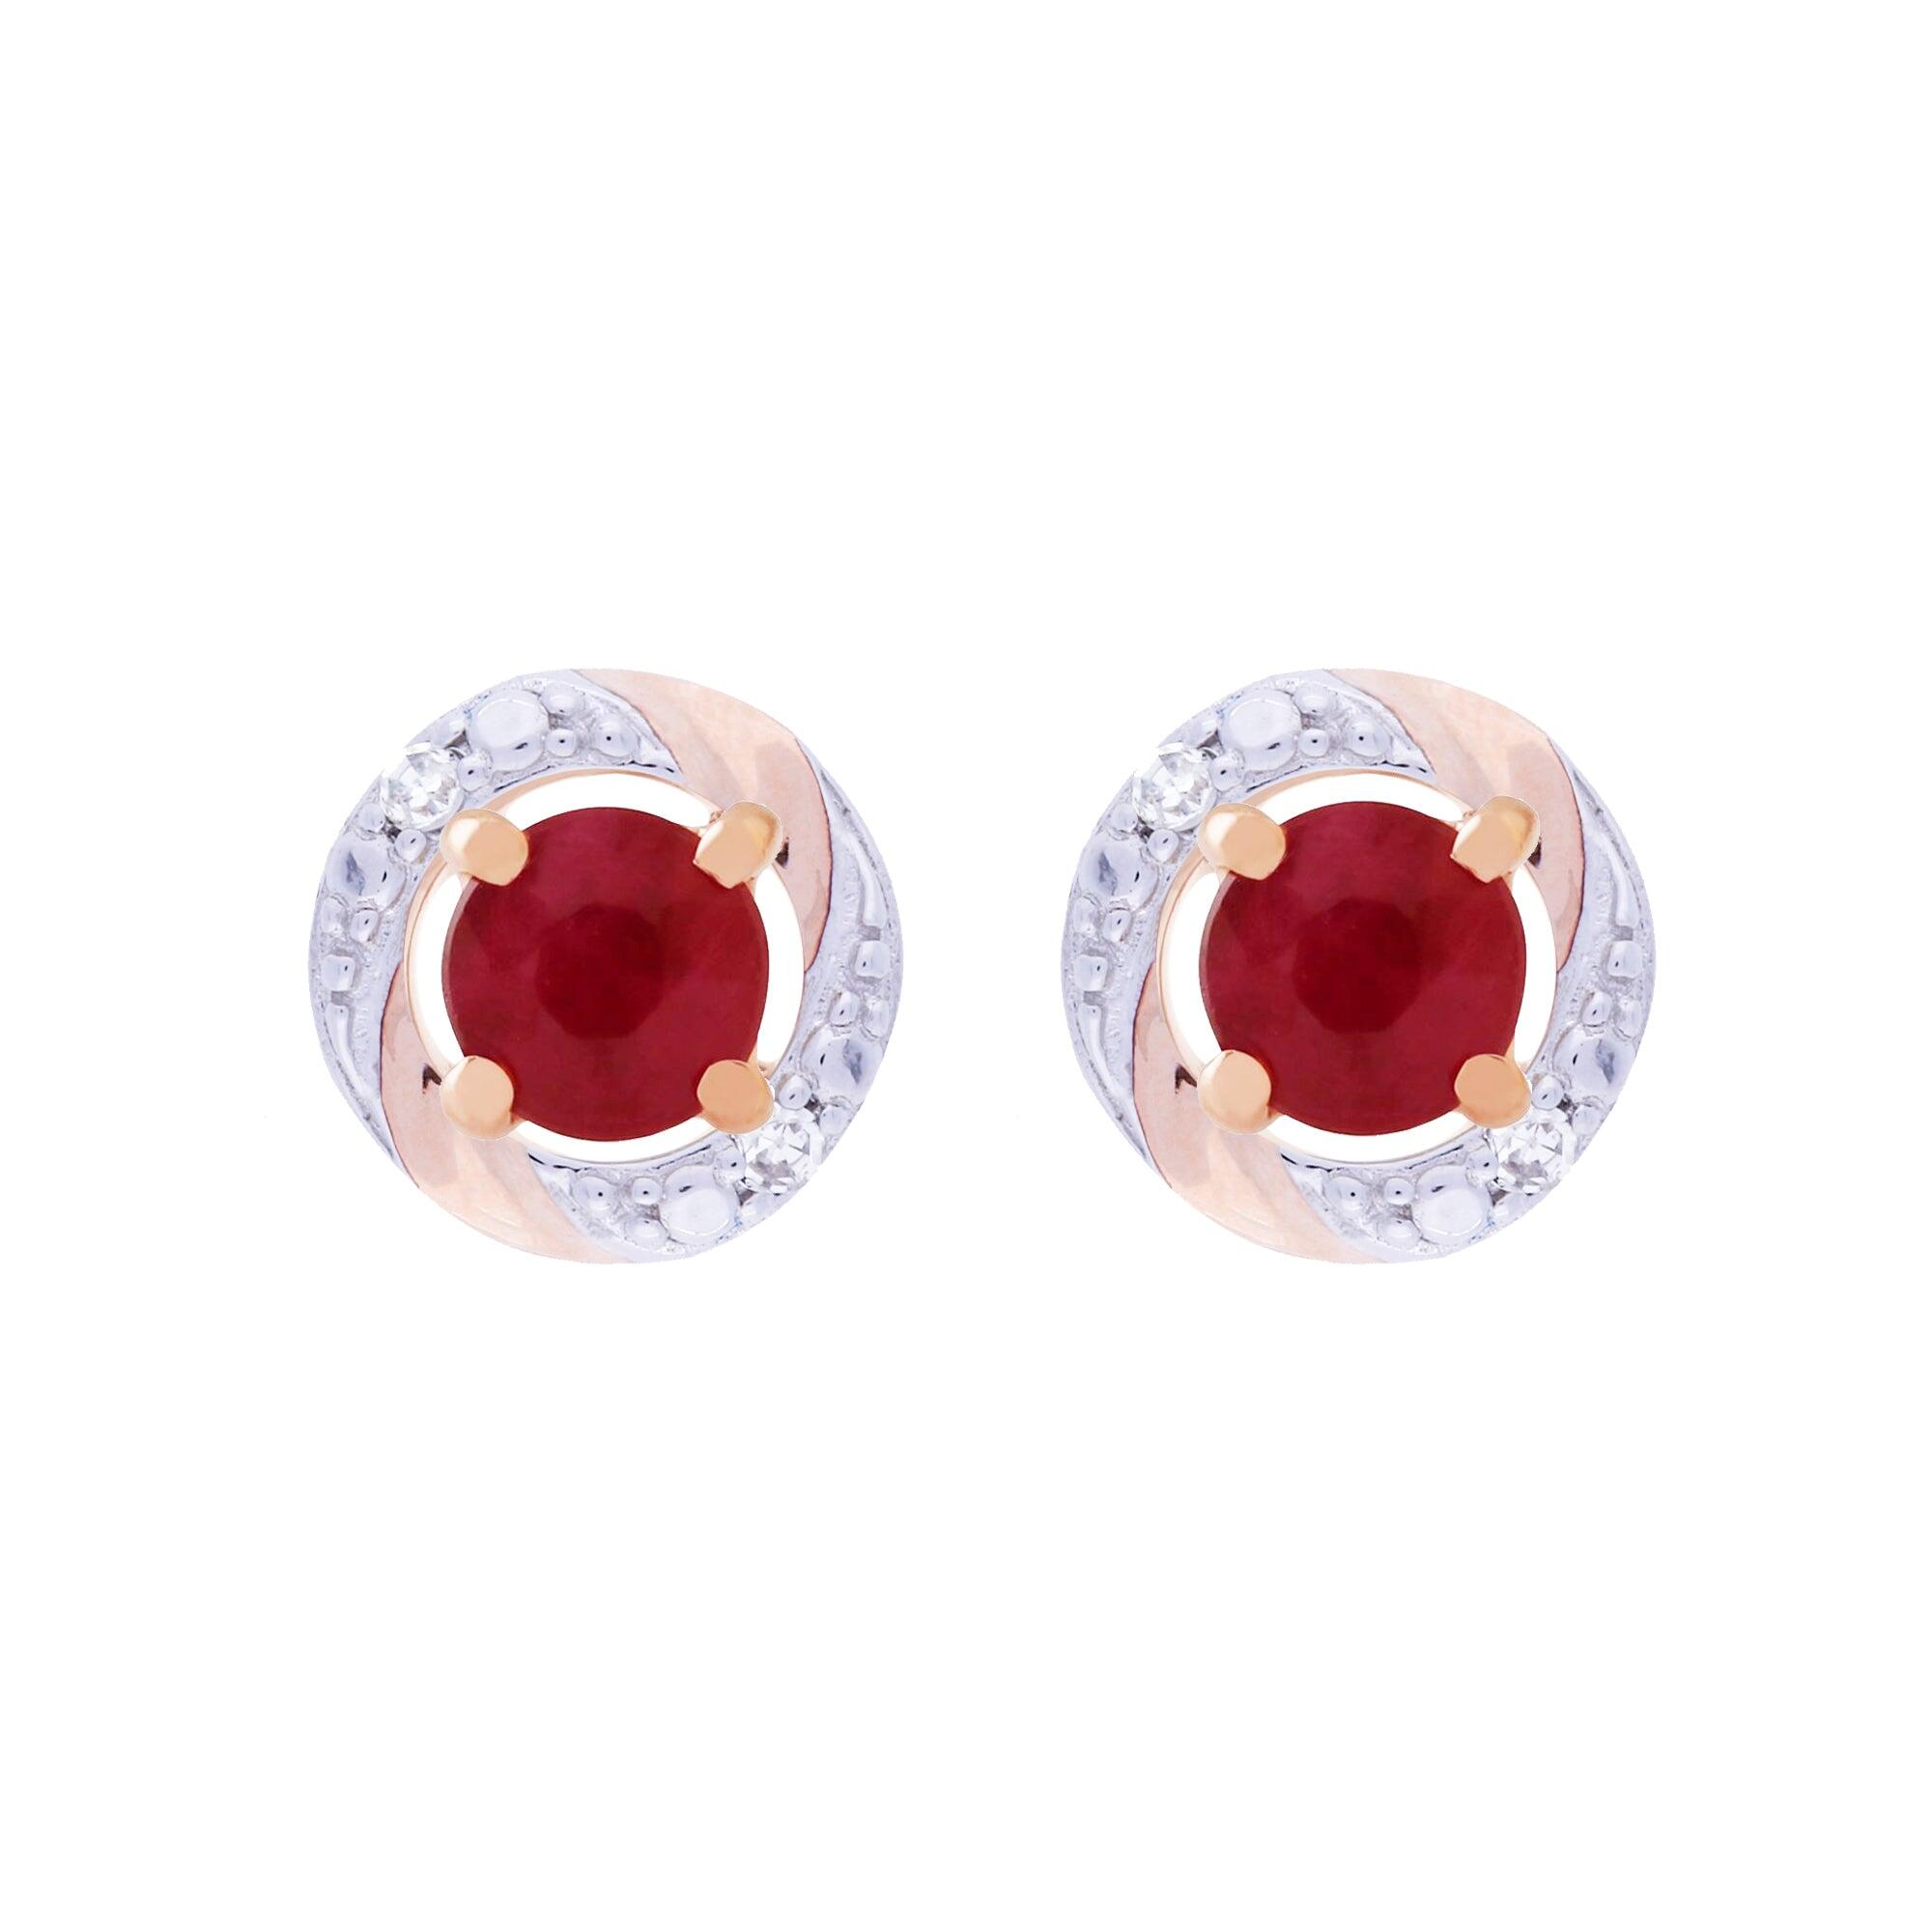 Classic Round Ruby Stud Earrings with Detachable Diamond Round Earrings Jacket Set in 9ct Rose Gold